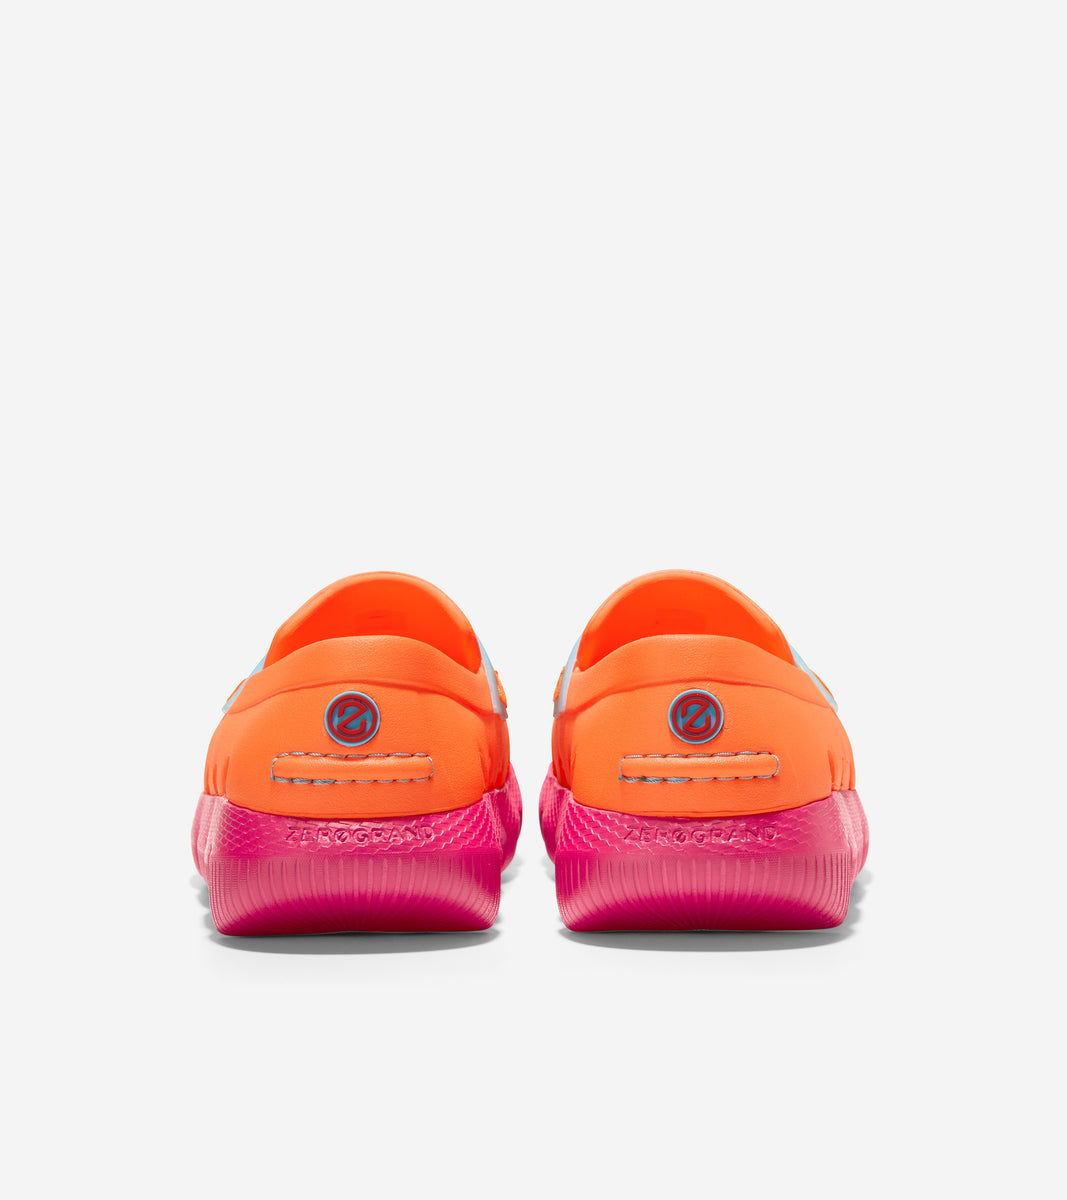 ColeHaan-4.ZEROGRAND All-Day Loafer-w23355-Shocking Orange-Bright Berry